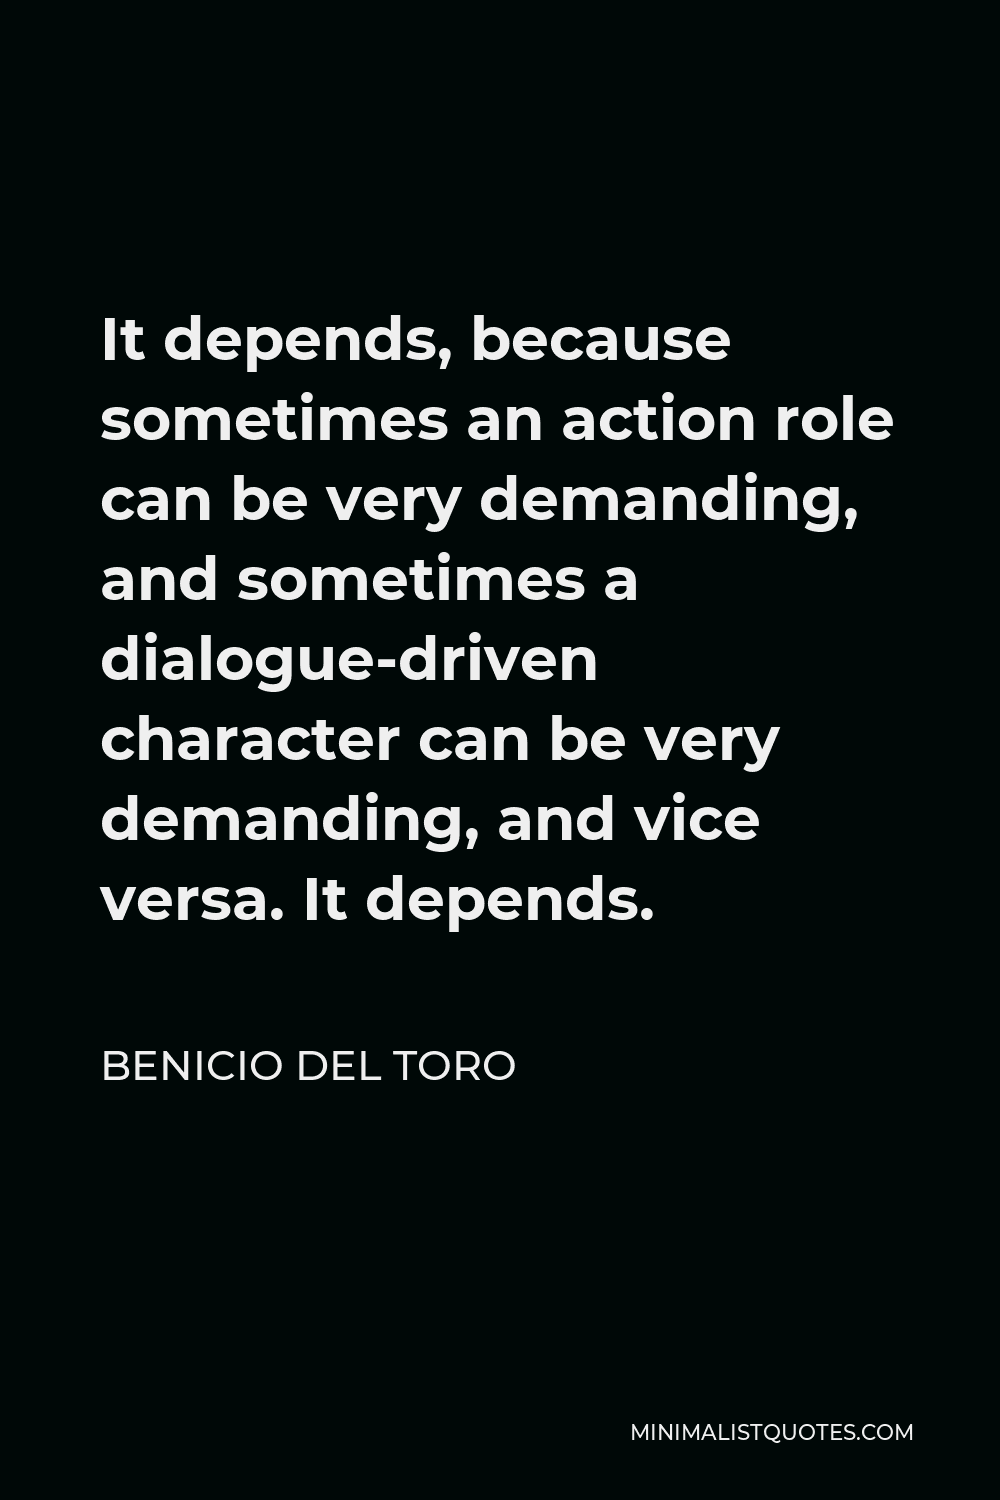 Benicio Del Toro Quote - It depends, because sometimes an action role can be very demanding, and sometimes a dialogue-driven character can be very demanding, and vice versa. It depends.